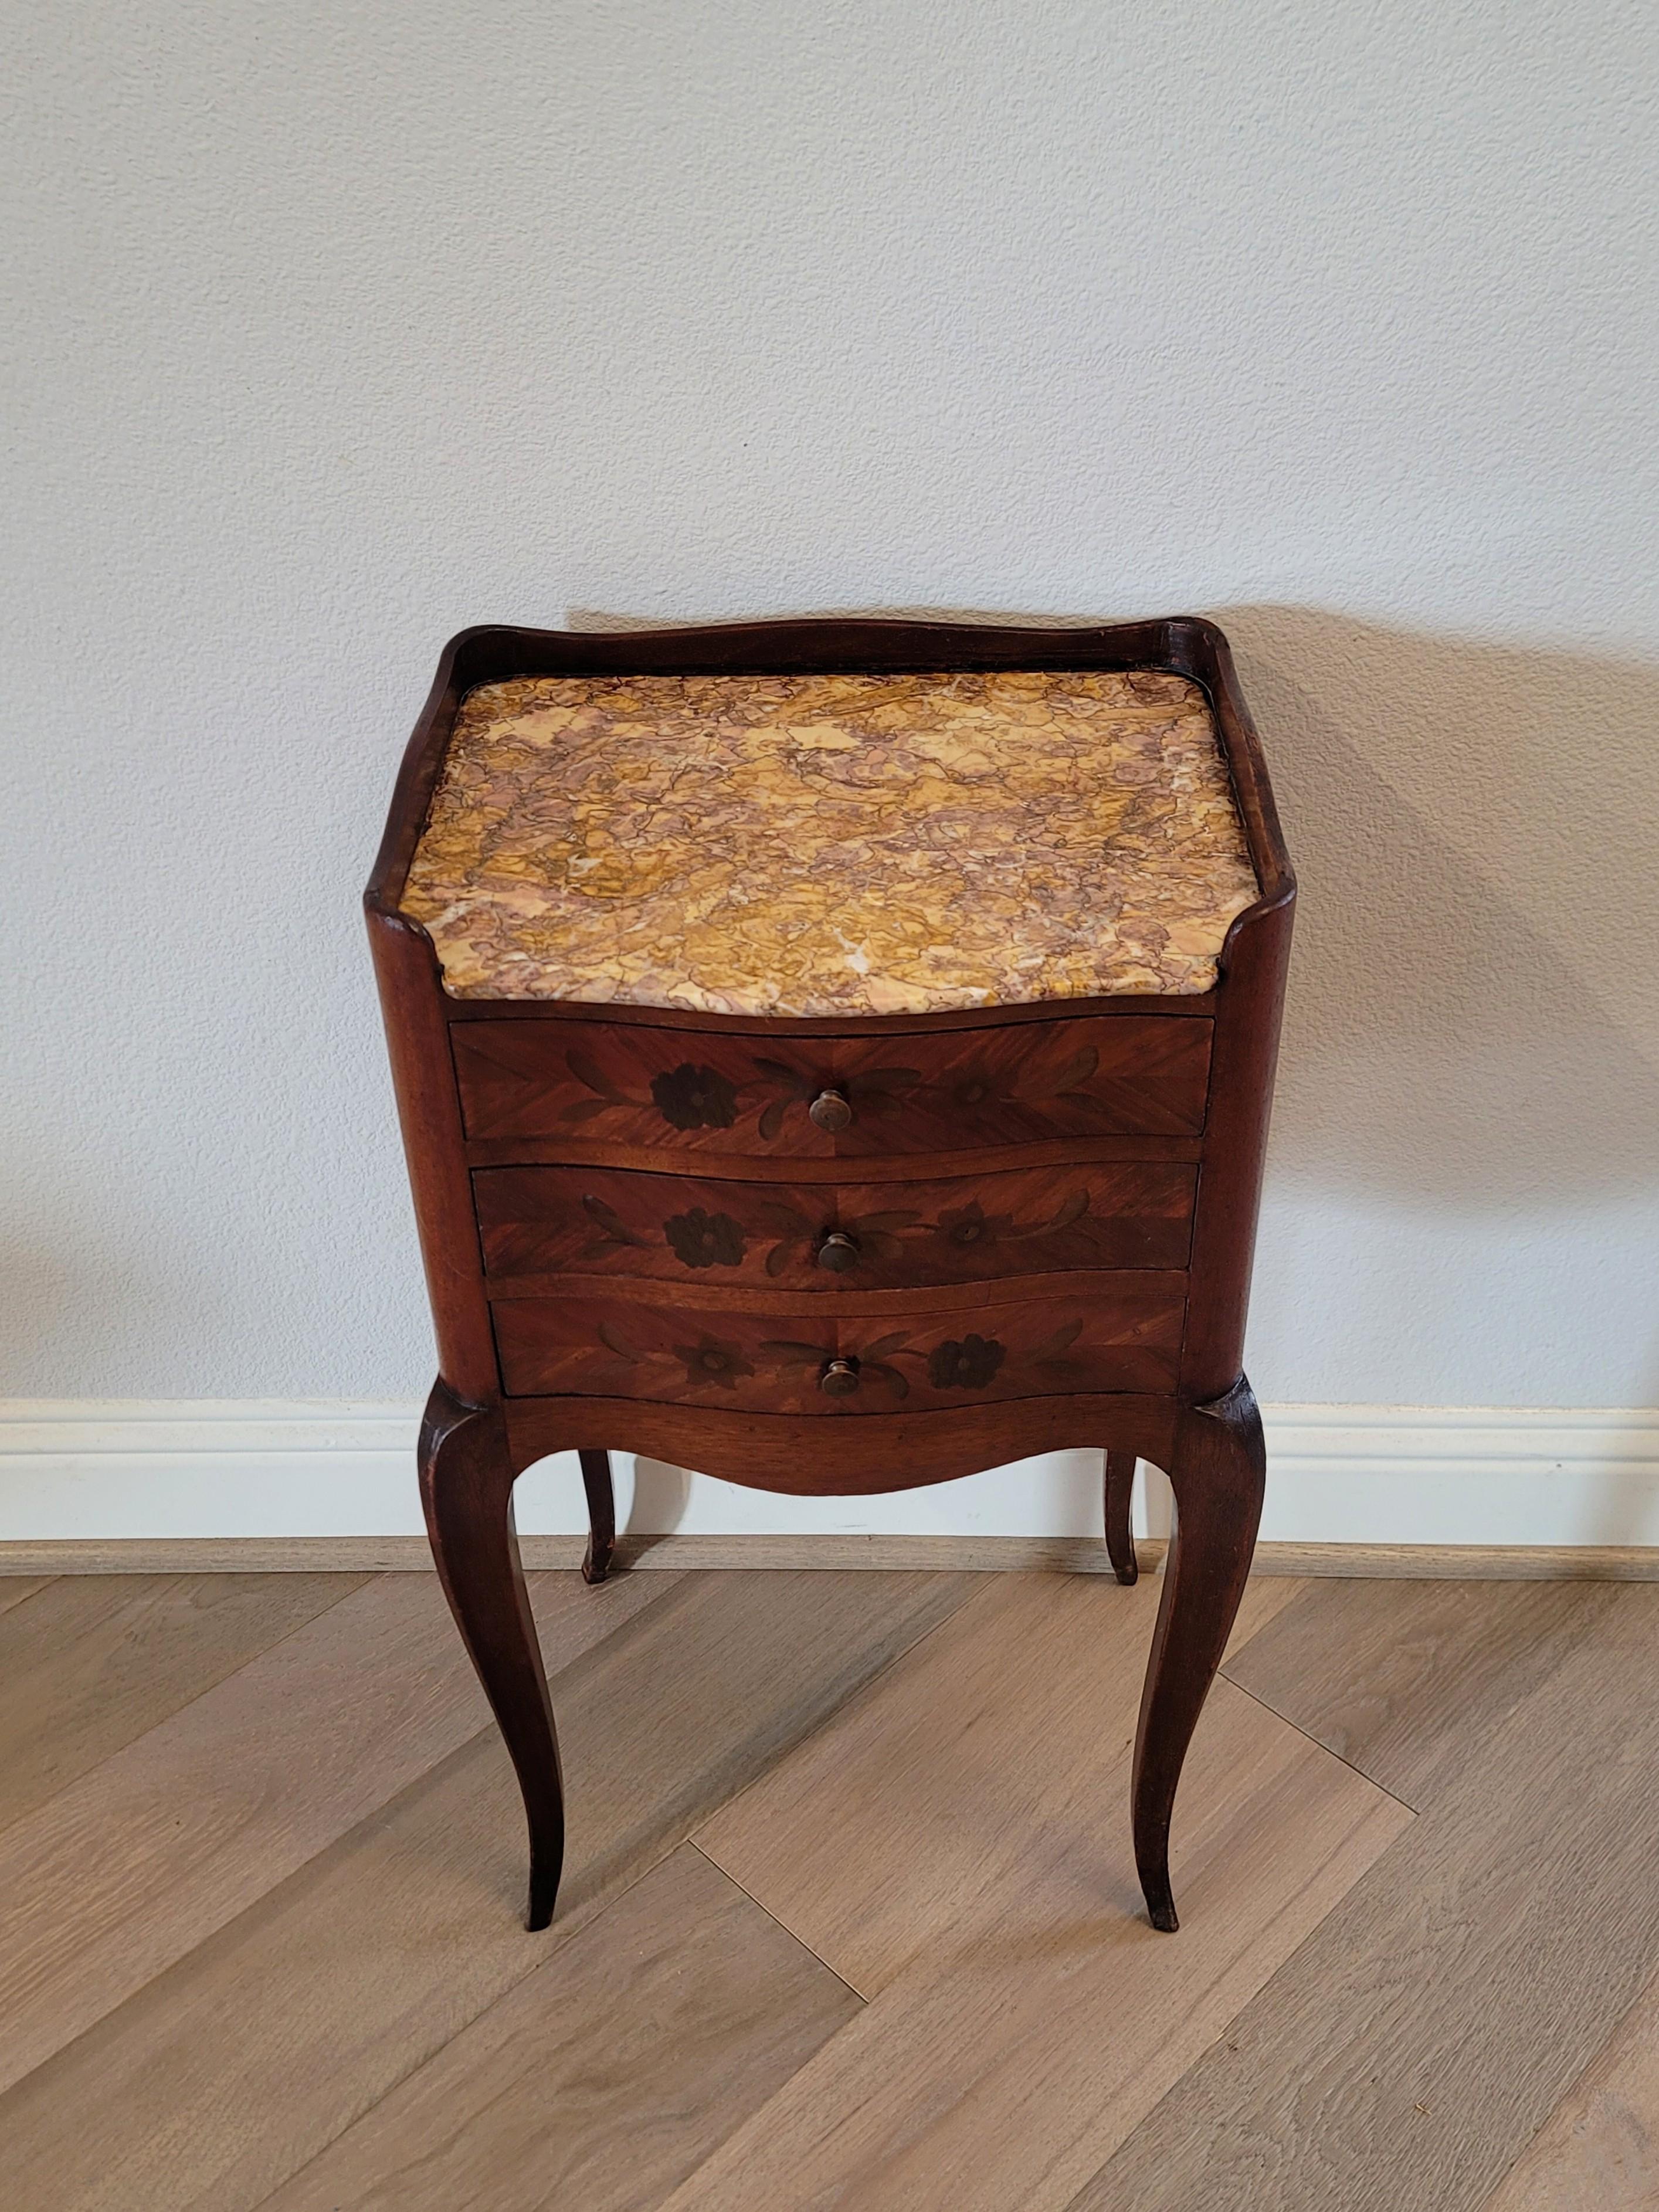 A scarce elegant French Louis XV style nightstand with beautifully aged warm mellow patina.

Born in France in the 19th century, having a partial undulating gallery framing the visually striking brocatelle marble top with dramatic graffiti